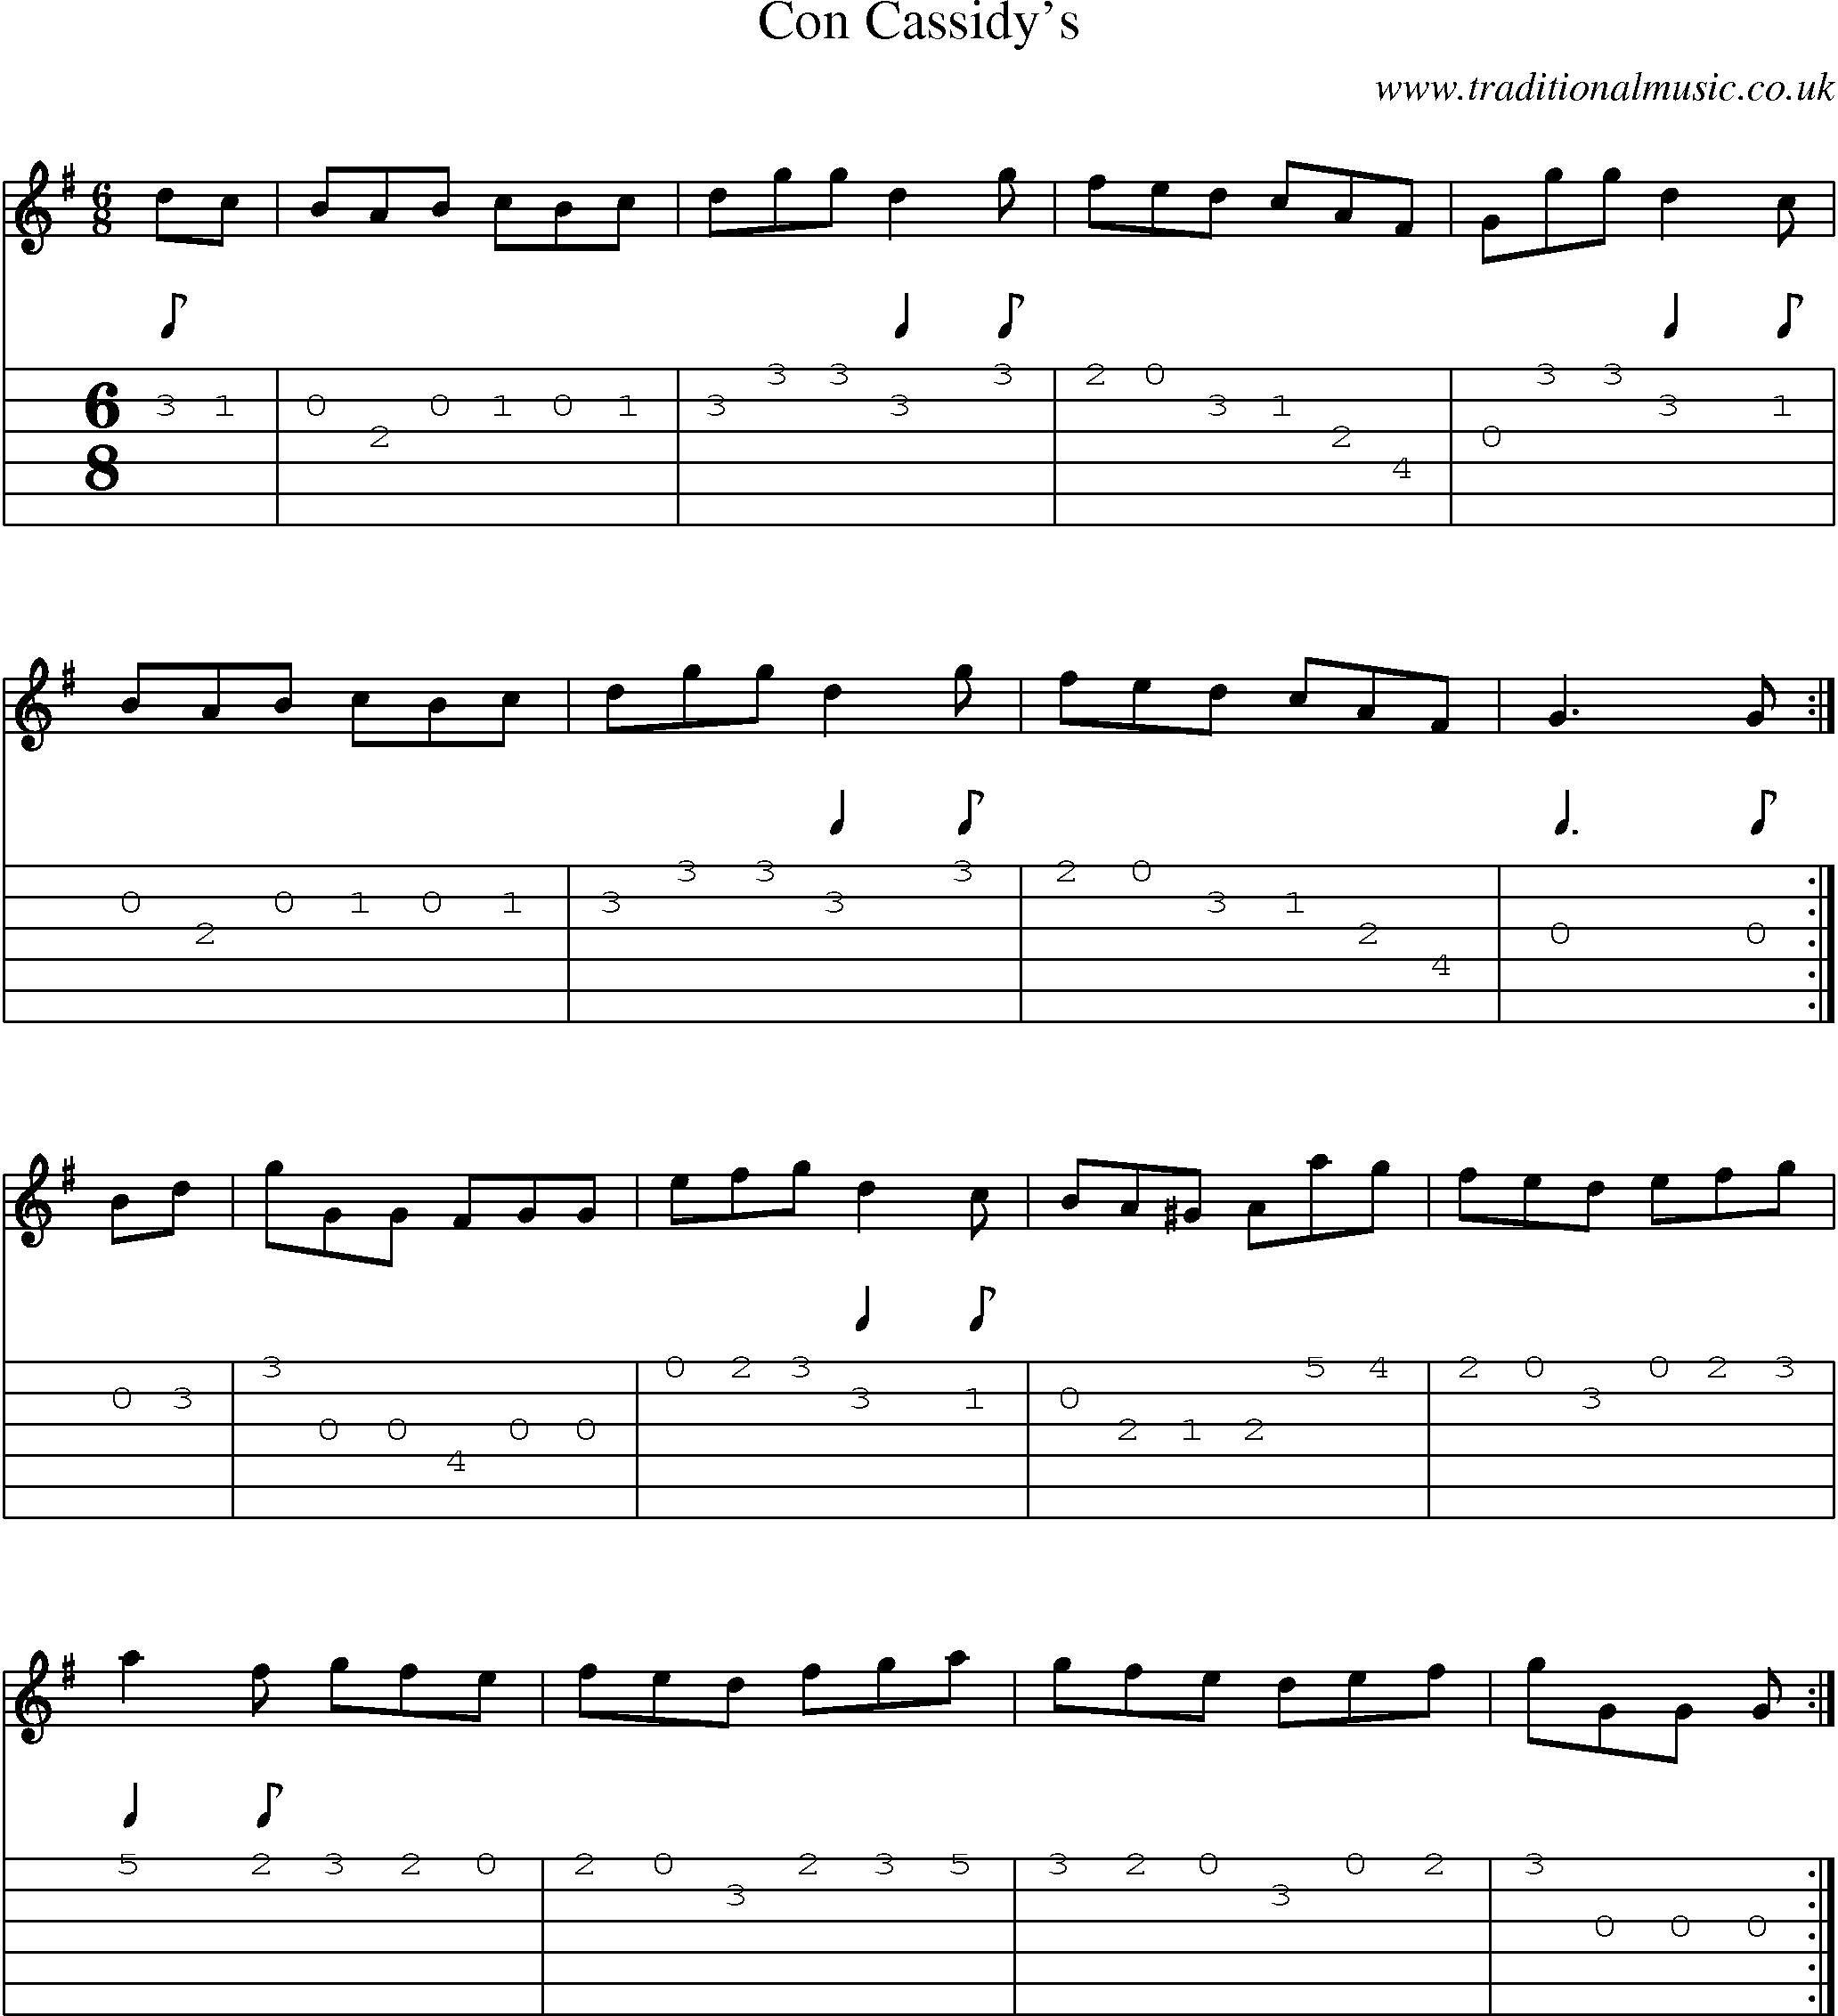 Music Score and Guitar Tabs for Con Cassidys